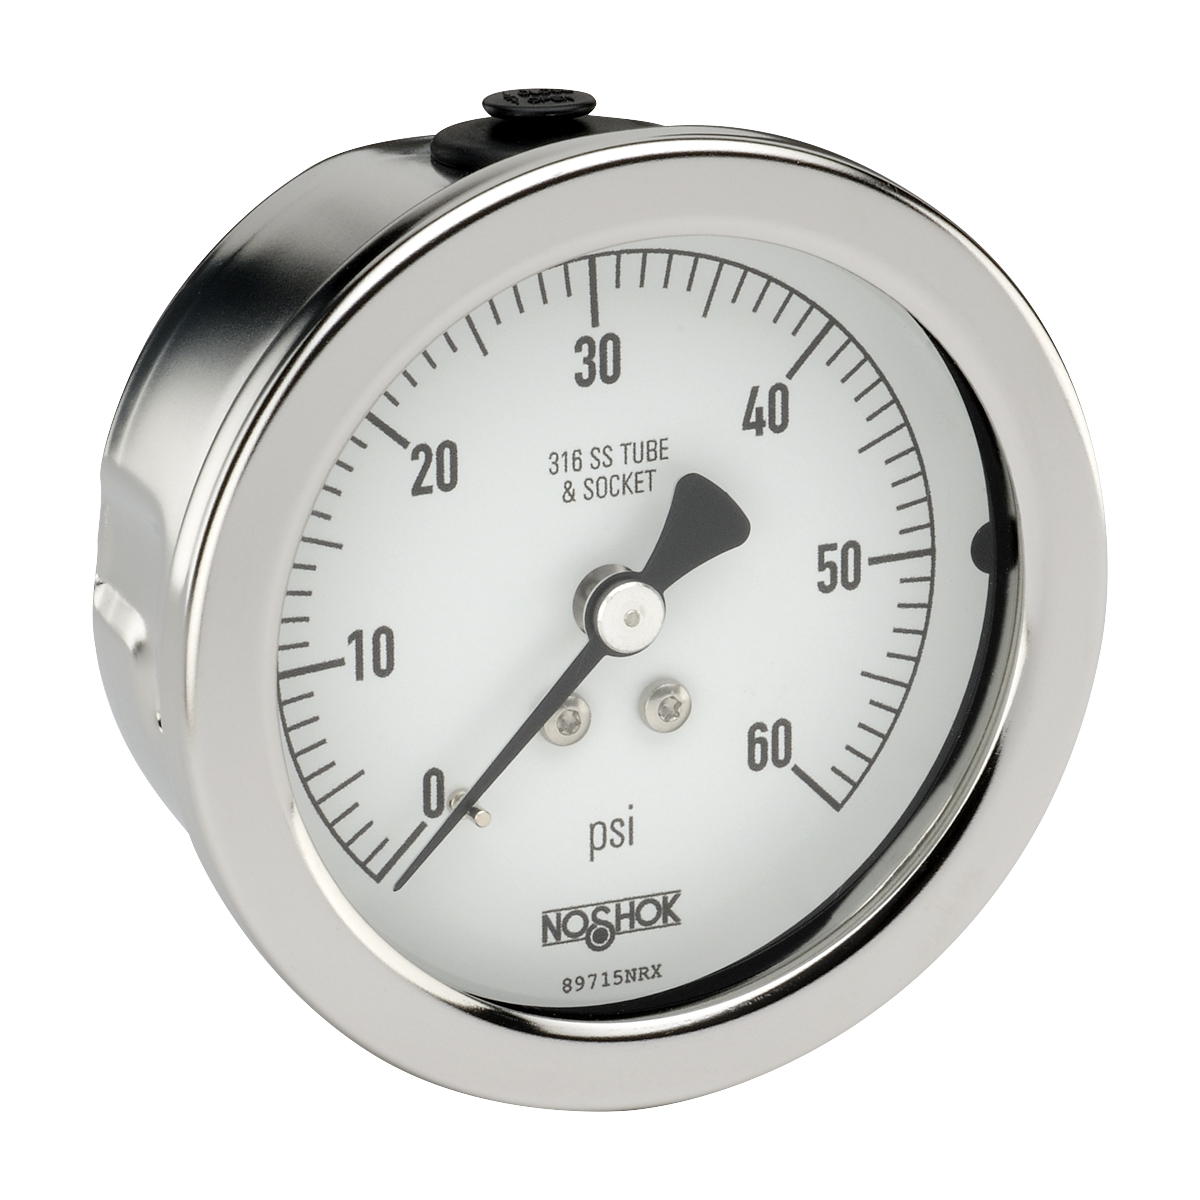 25-510-10000-psi/bar 400/500 Series All Stainless Steel Dry and Liquid Filled Pressure Gauges